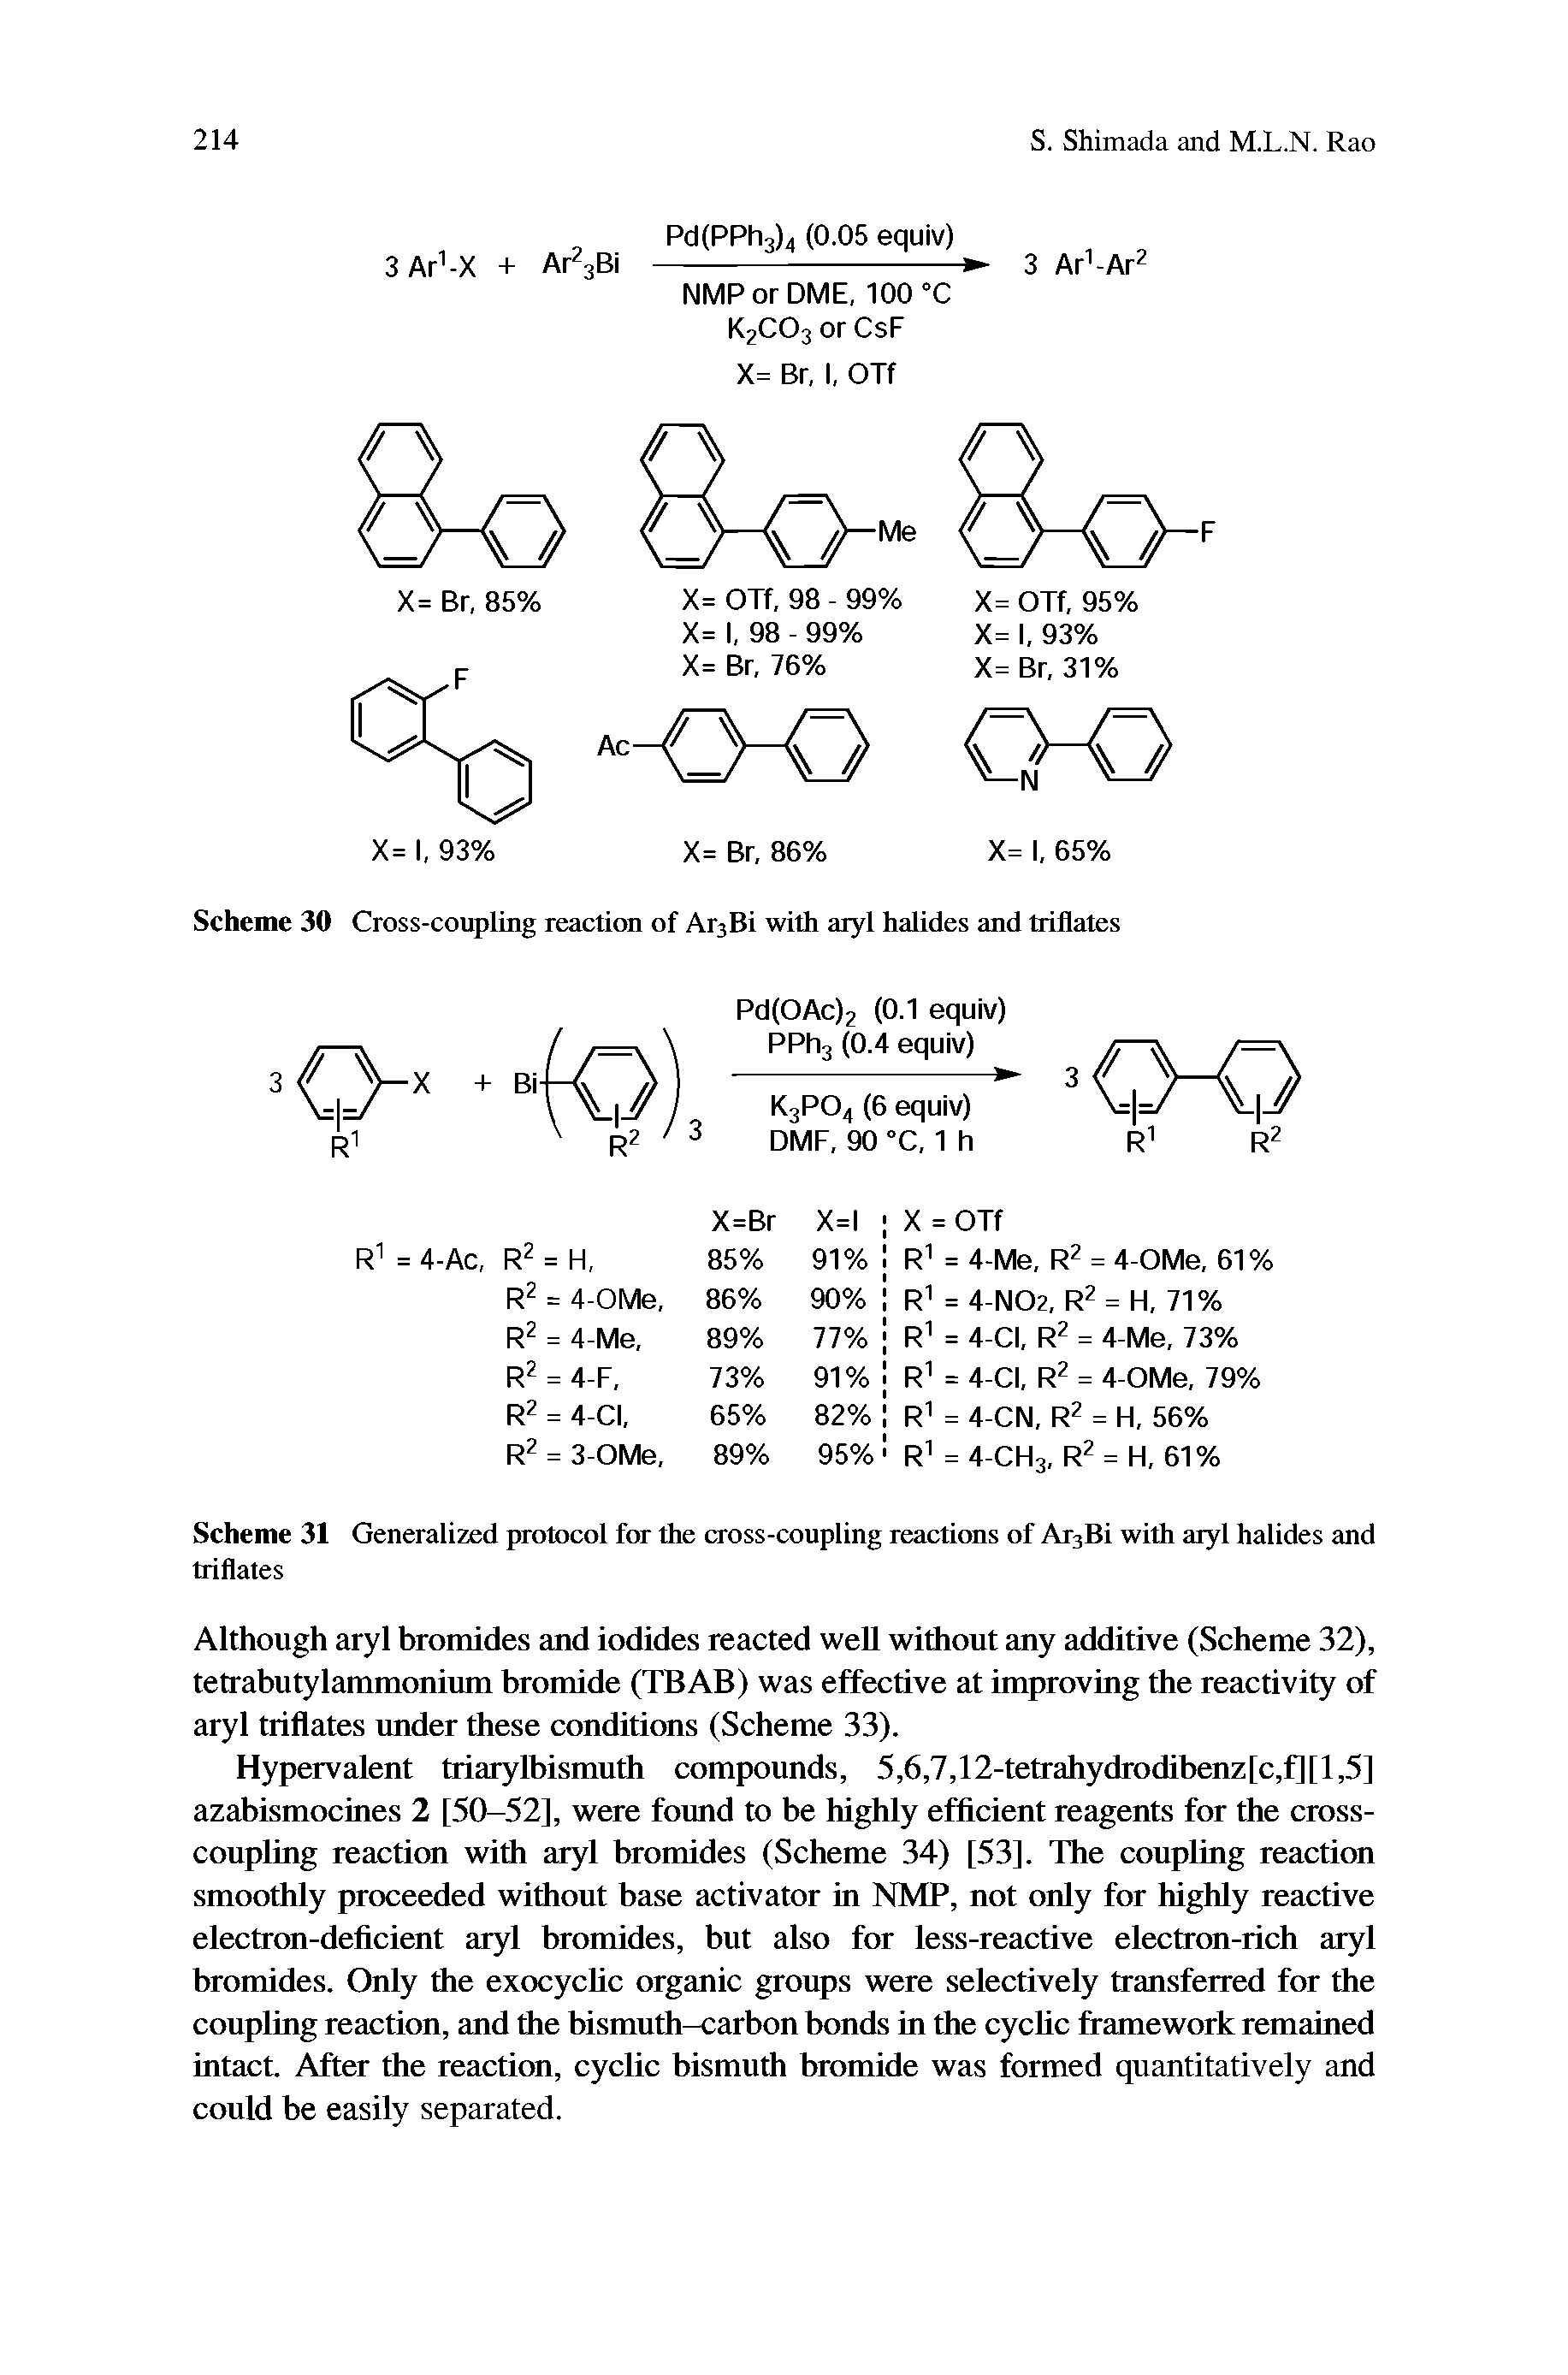 Scheme 30 Cross-coupling reaction of Ar3Bi with aryl halides and triflates...